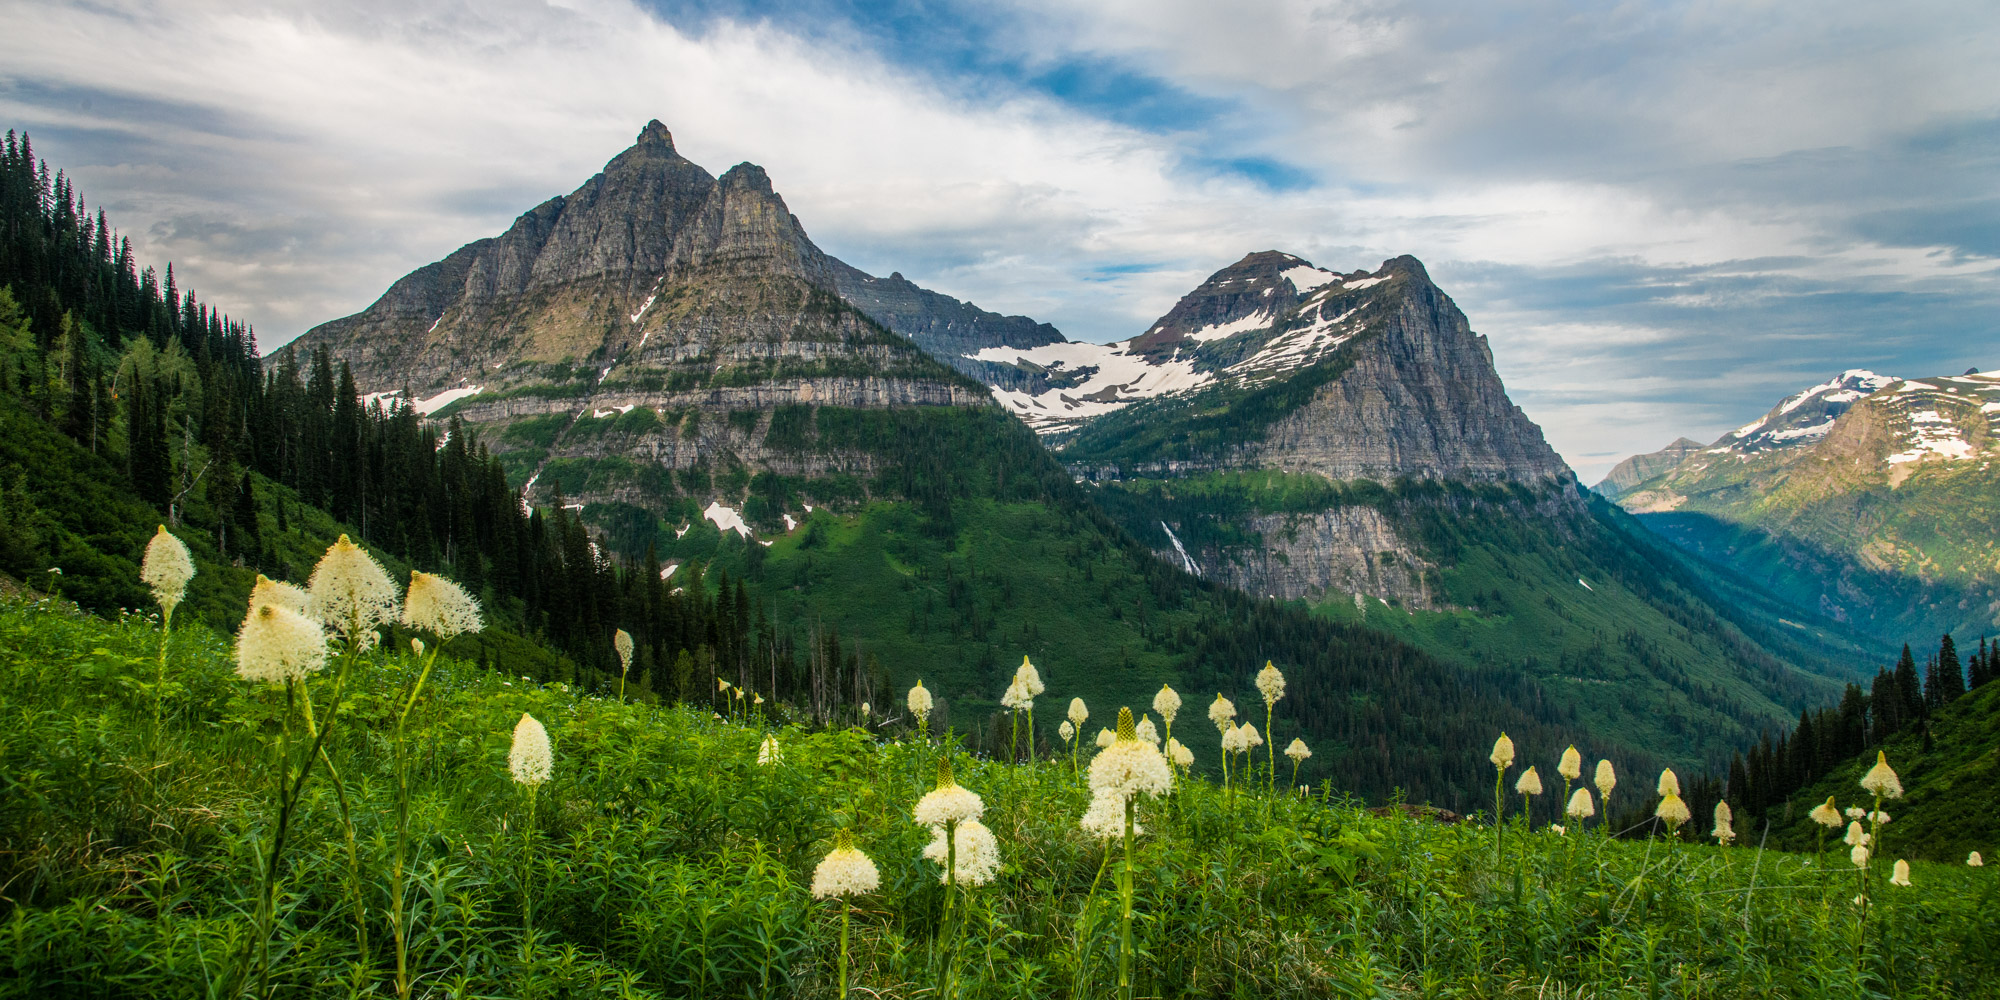 Bear Grass blooming in Glacier National Park: a Panoramic fine art limited edition of 200 prints by Jess Lee.  To learn more...